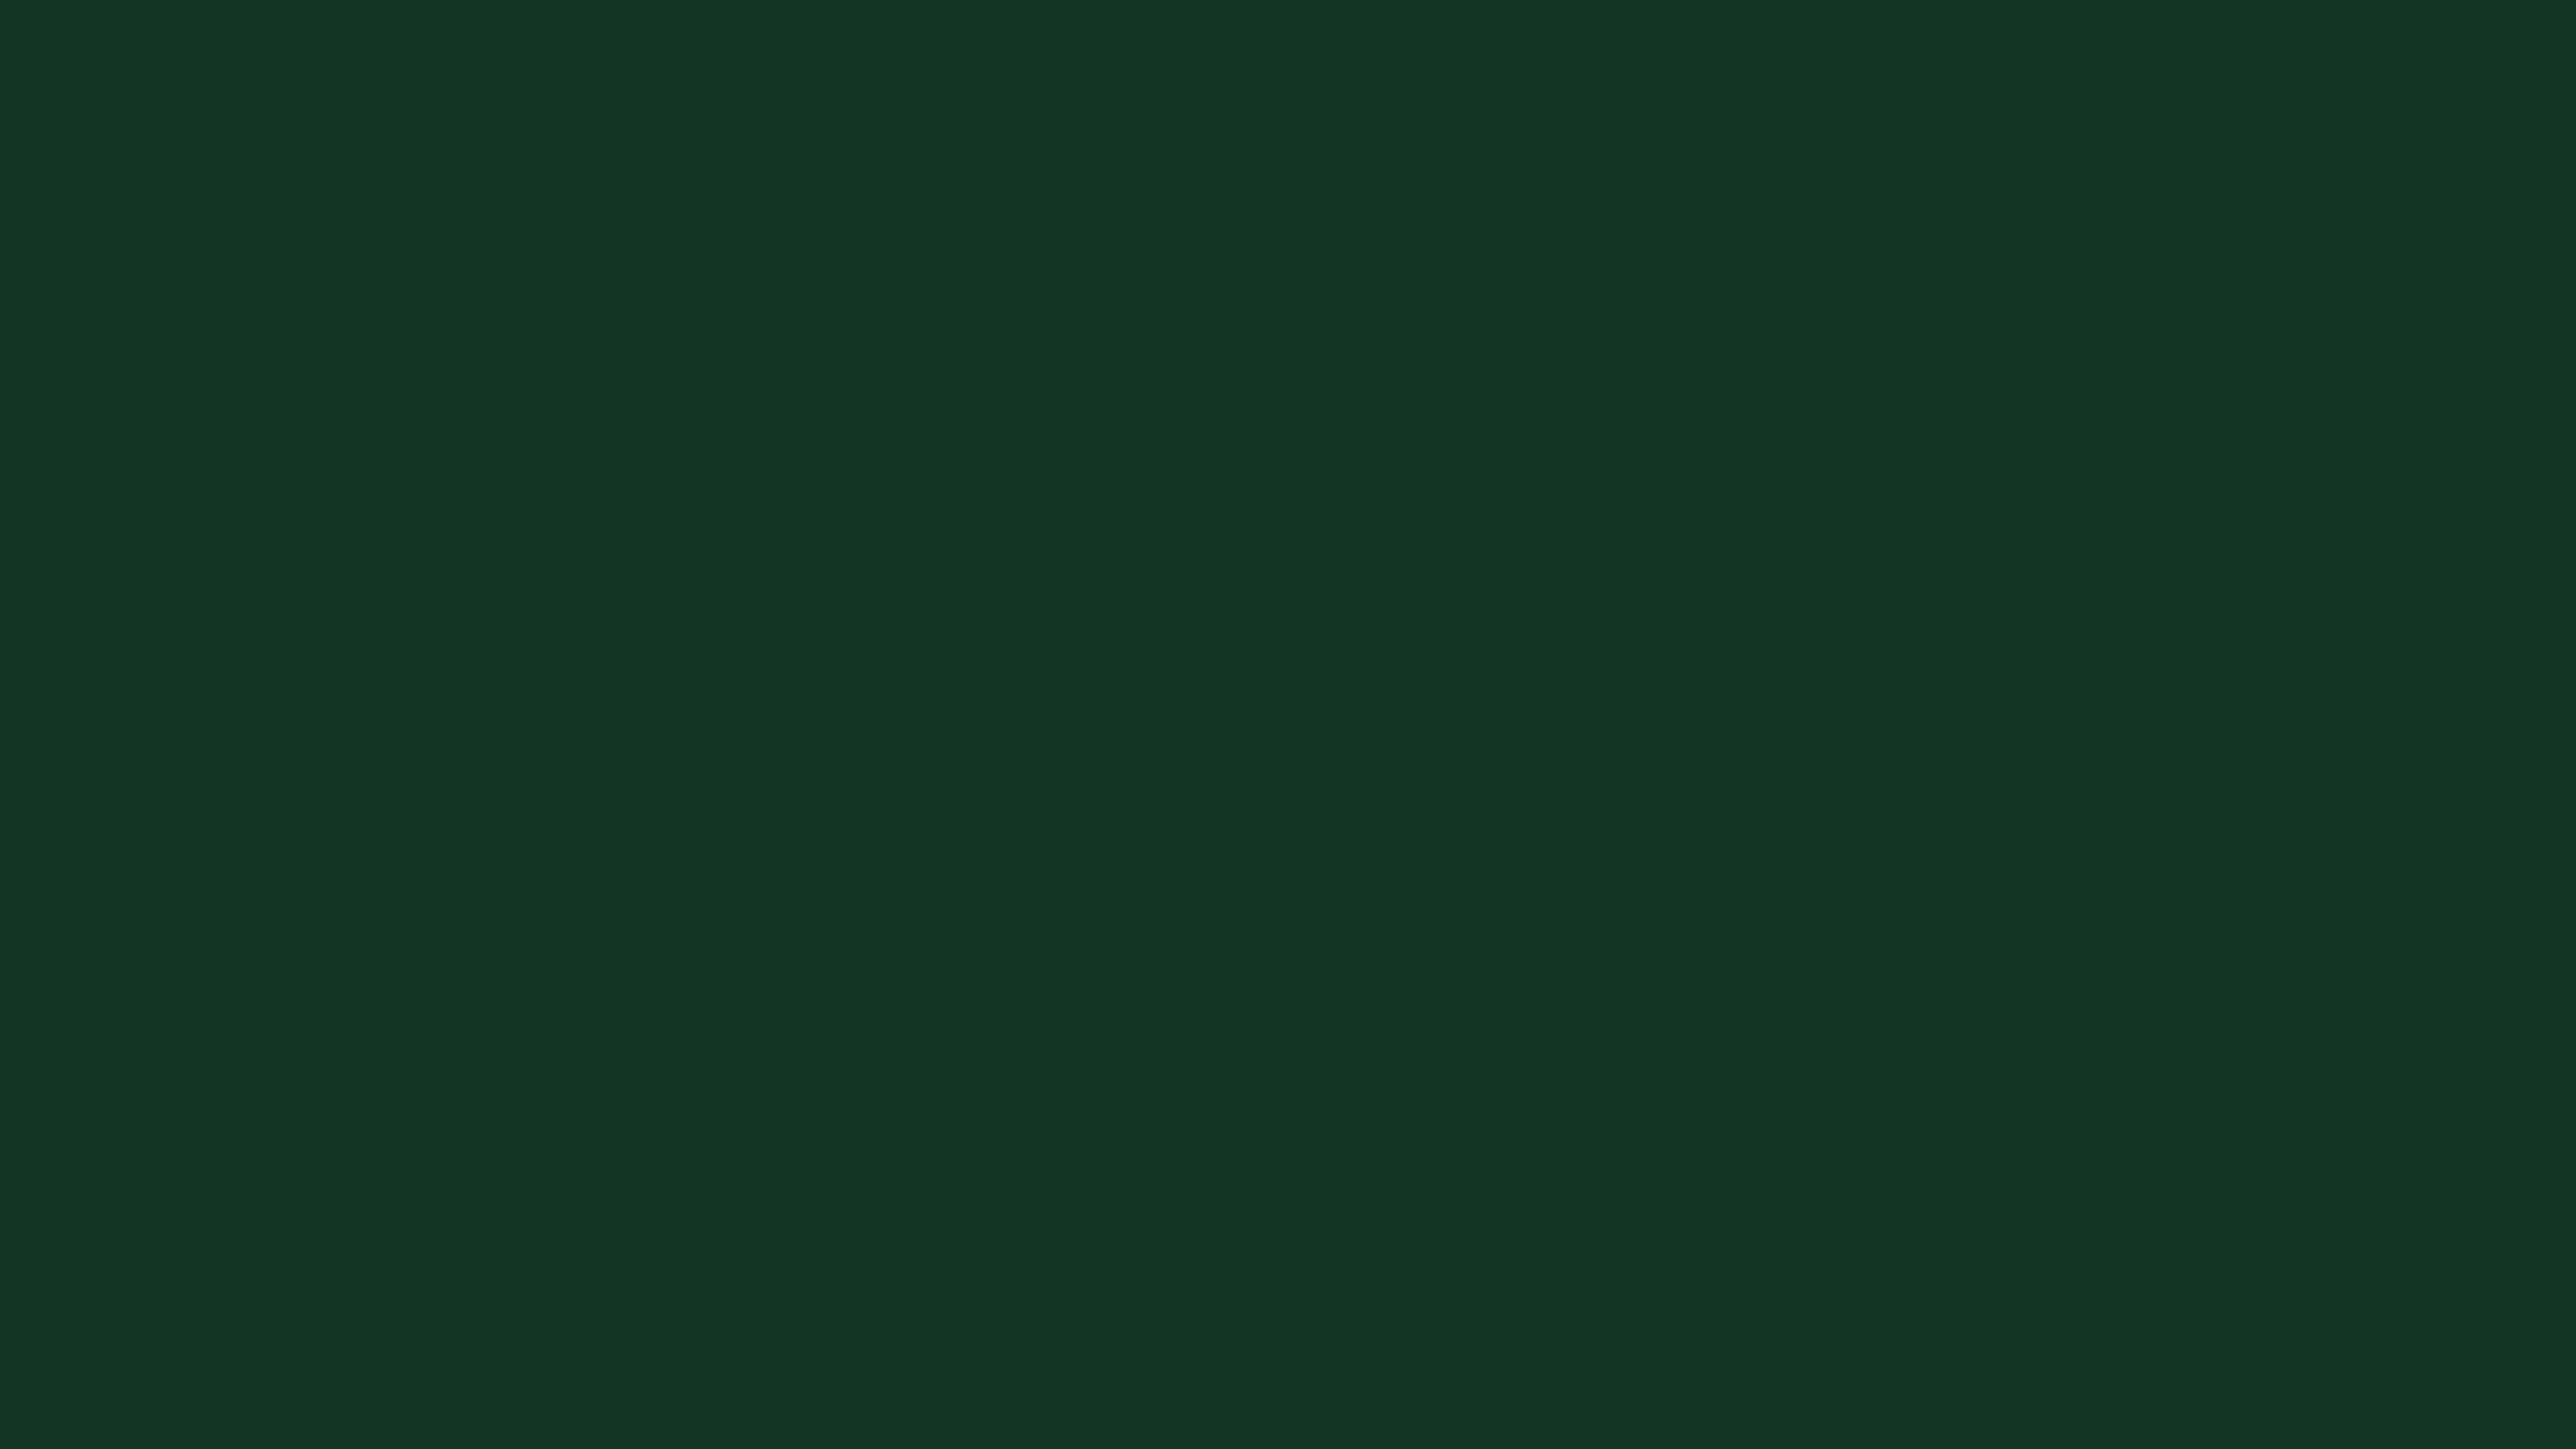 7680x4320 Phthalo Green Solid Color Background